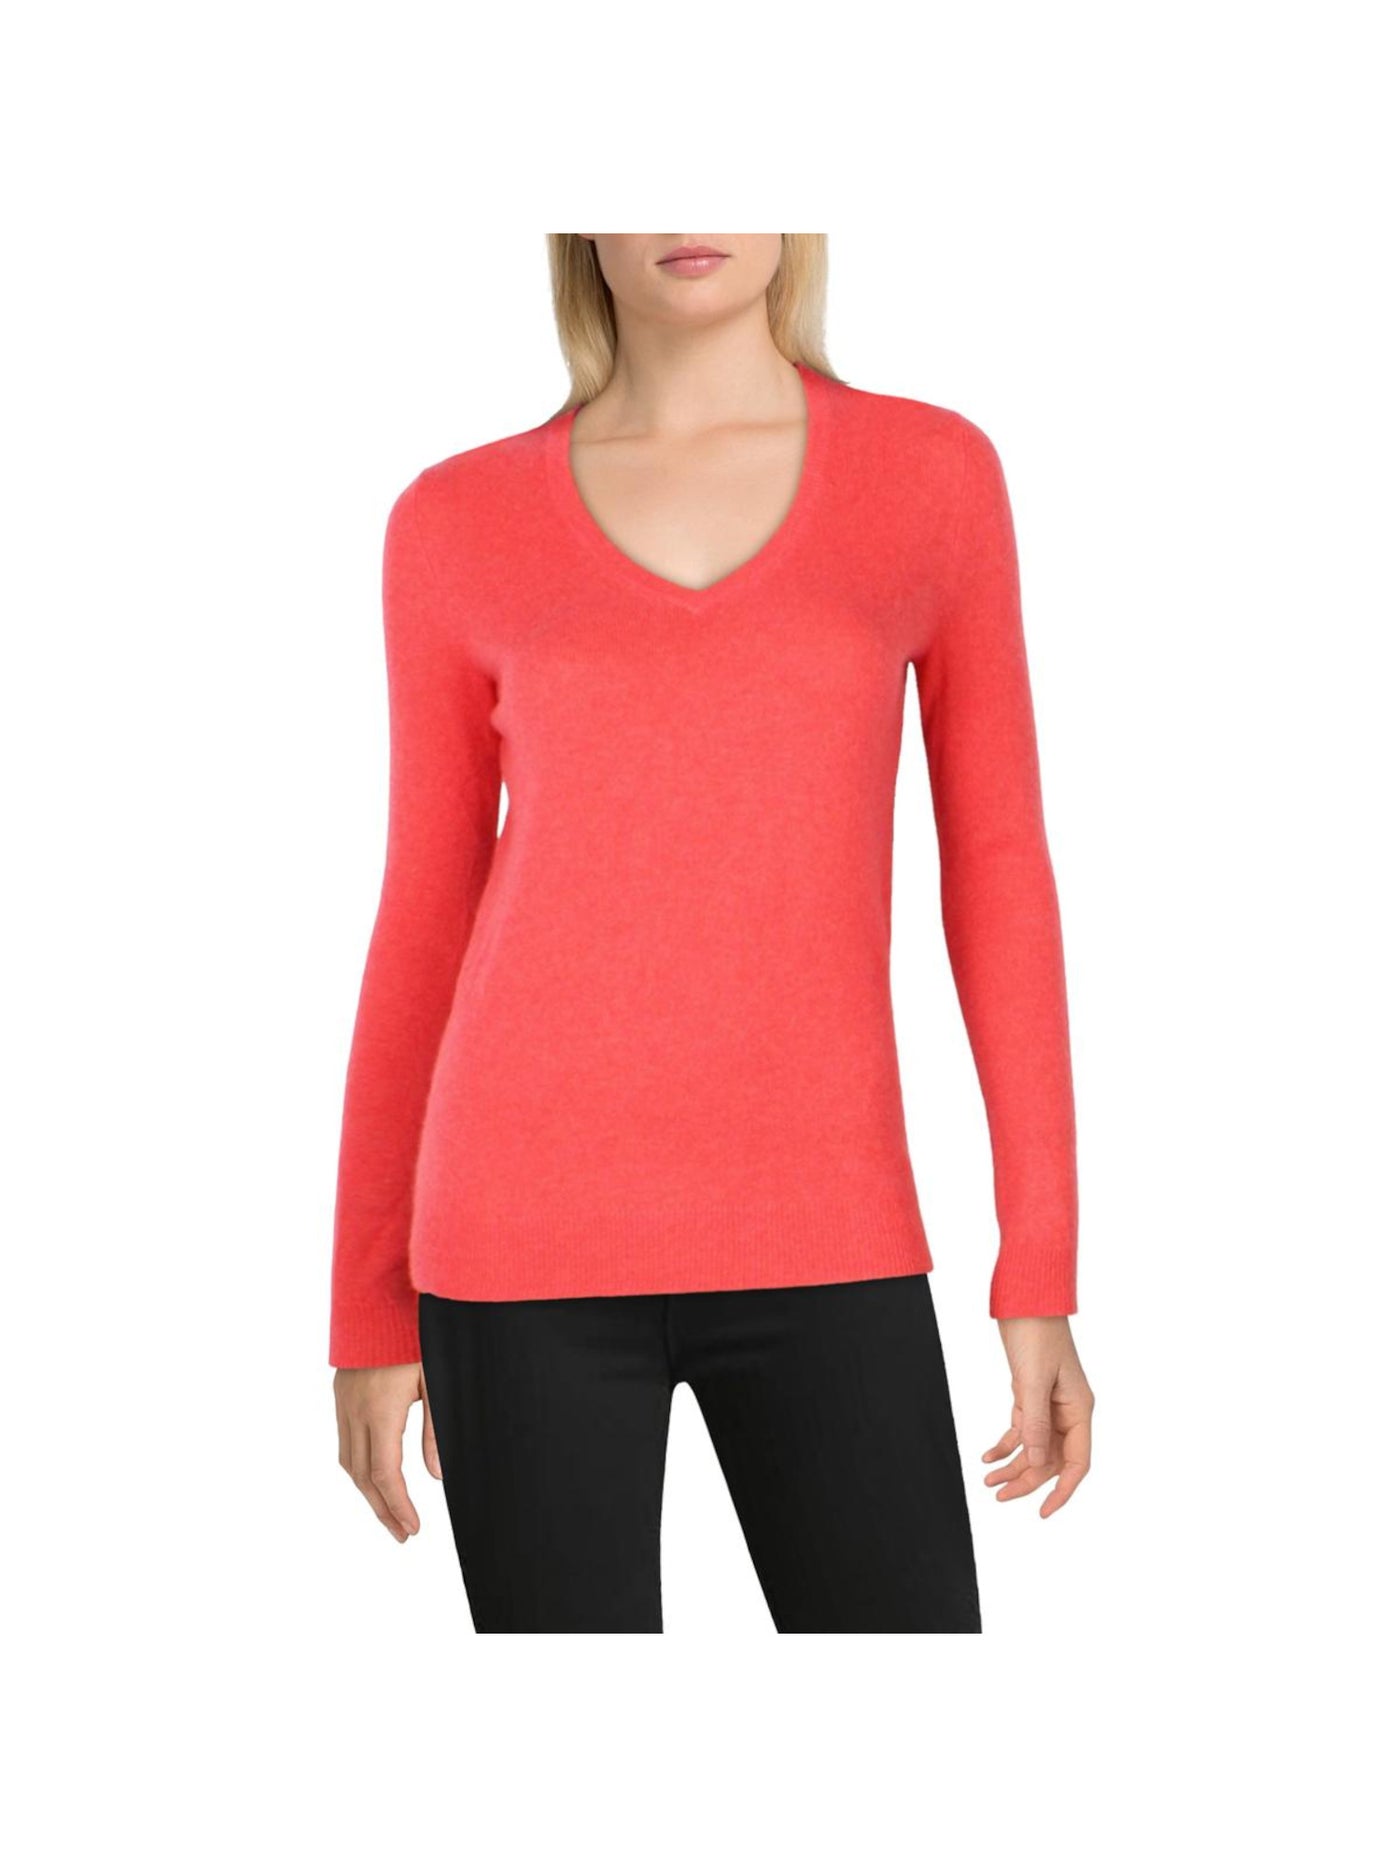 C Womens Red Cashmere Long Sleeve V Neck Sweater S